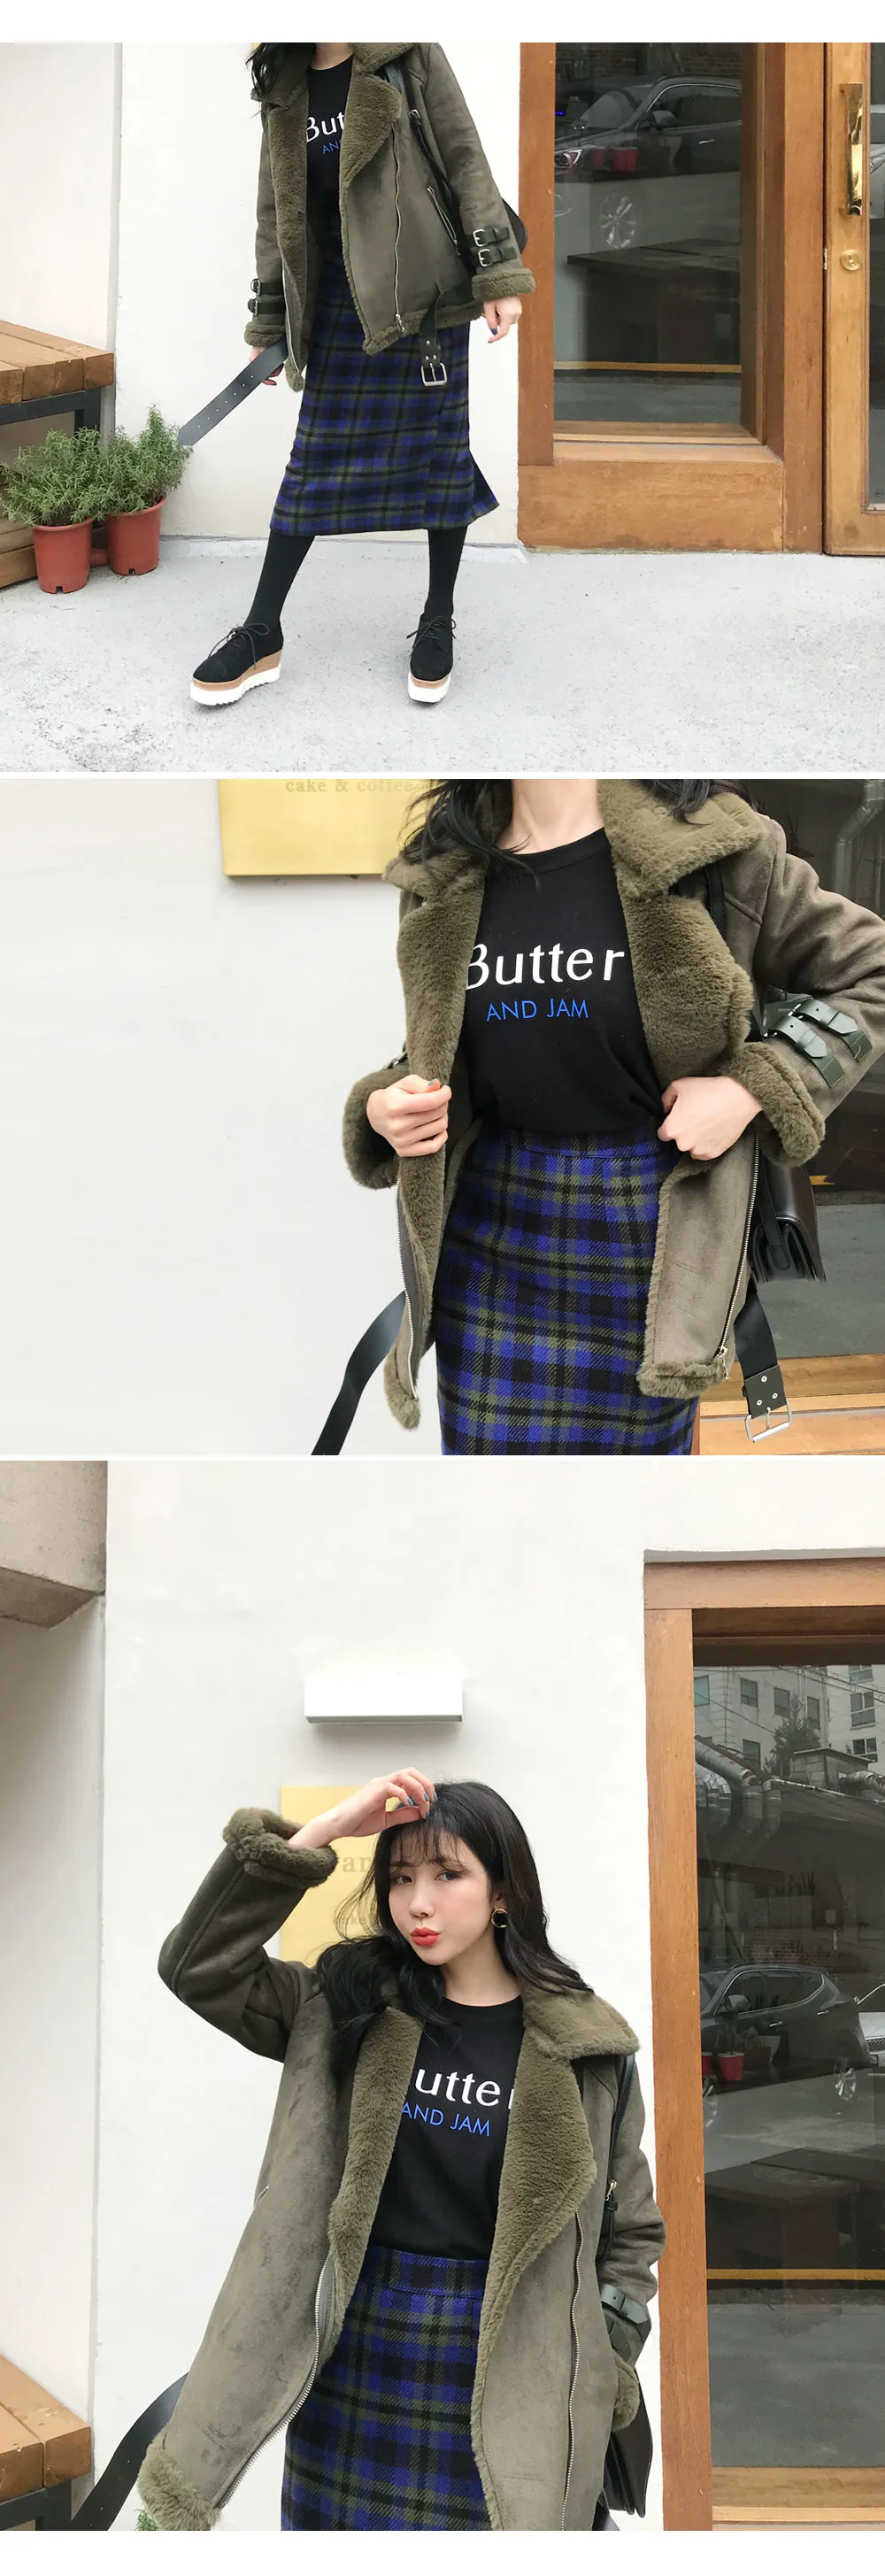 Butter AND JAMルーズTシャツ・全2色 | DHOLIC | 詳細画像9